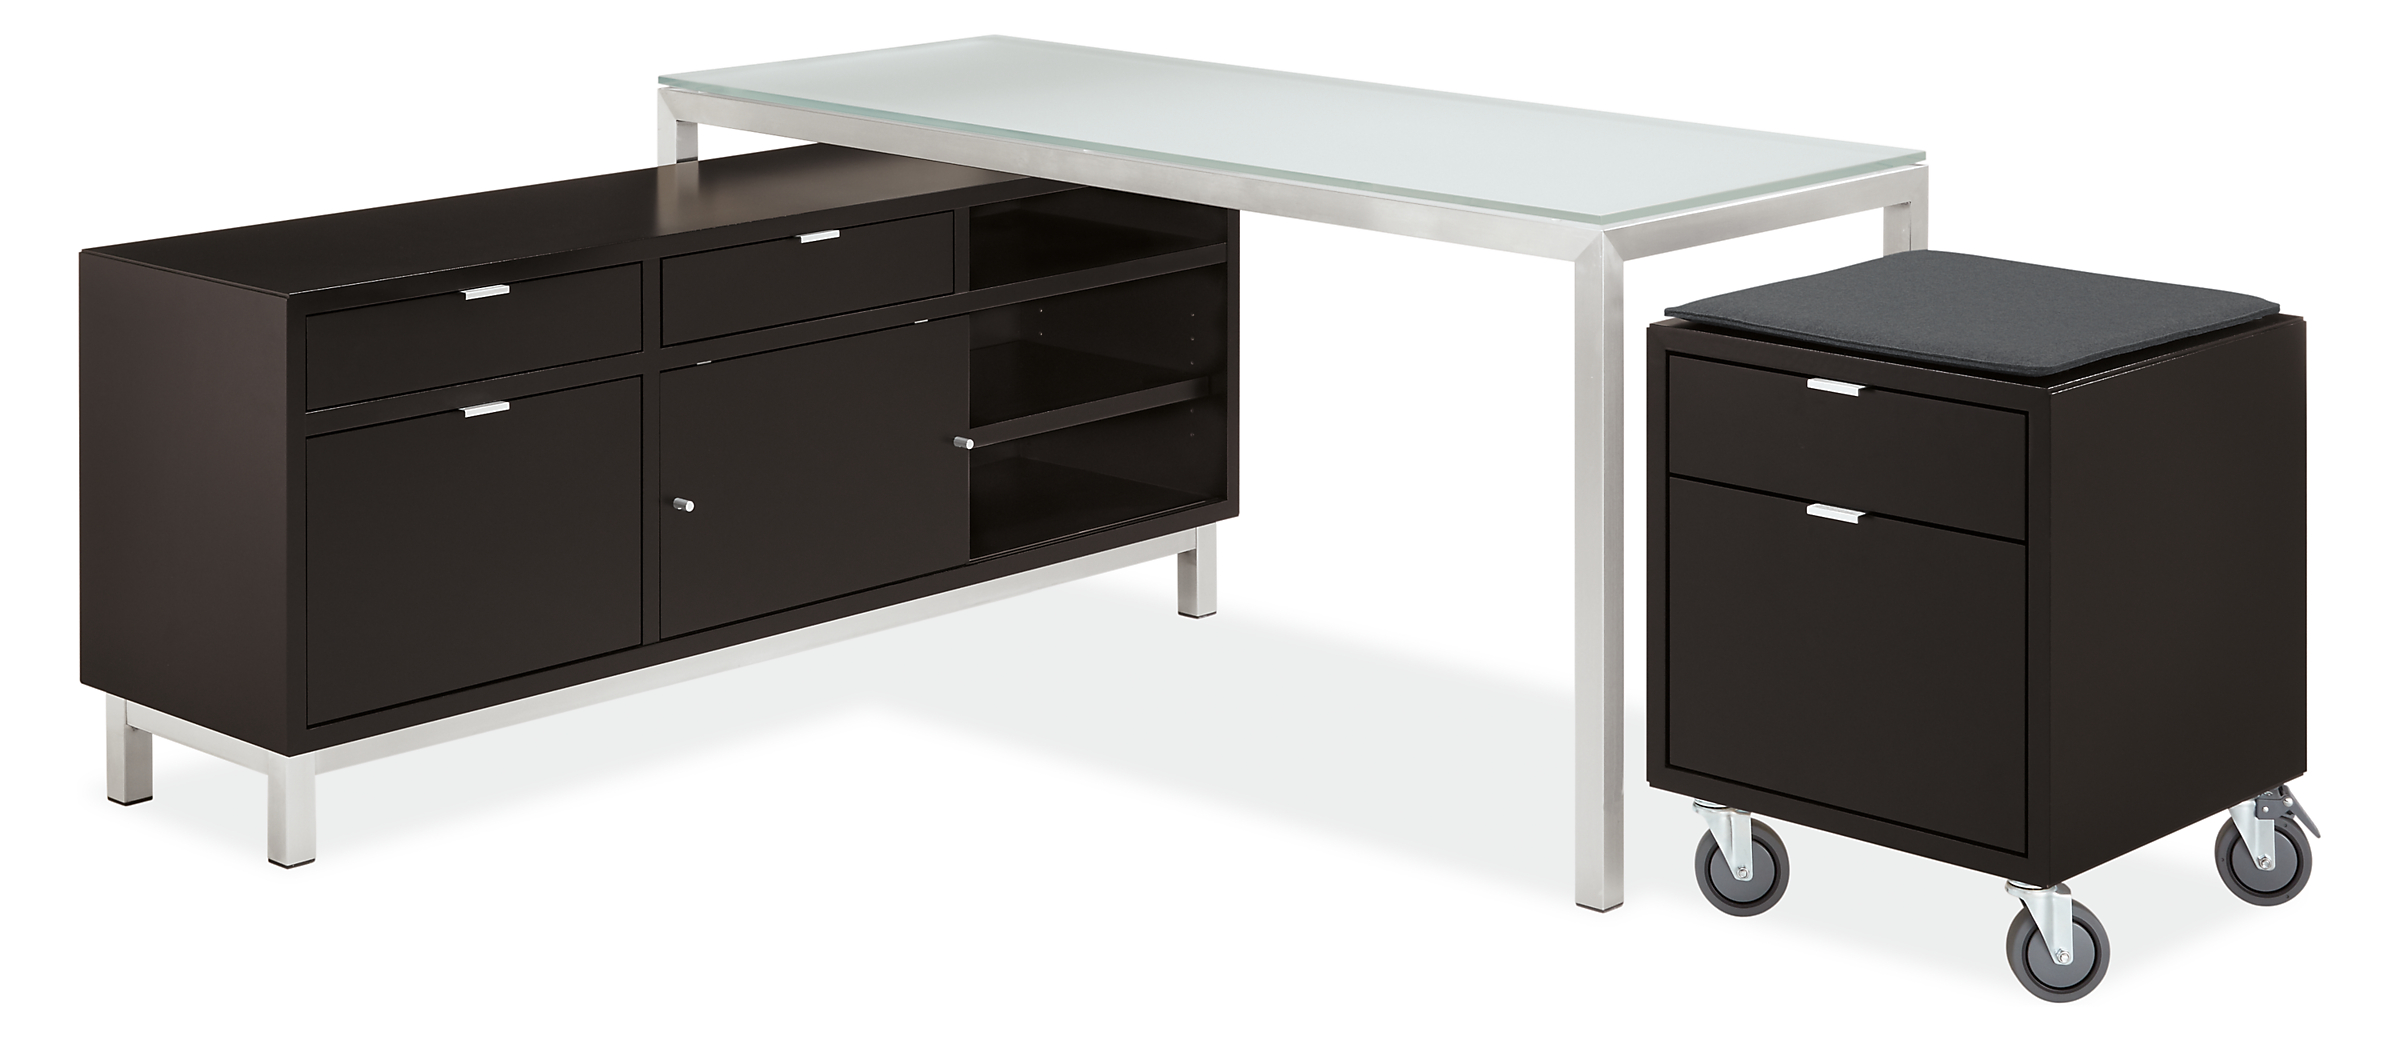 Copenhagen 60w 16d 25h Left-File Drawer Bench with Parsons Stainless Steel Desk